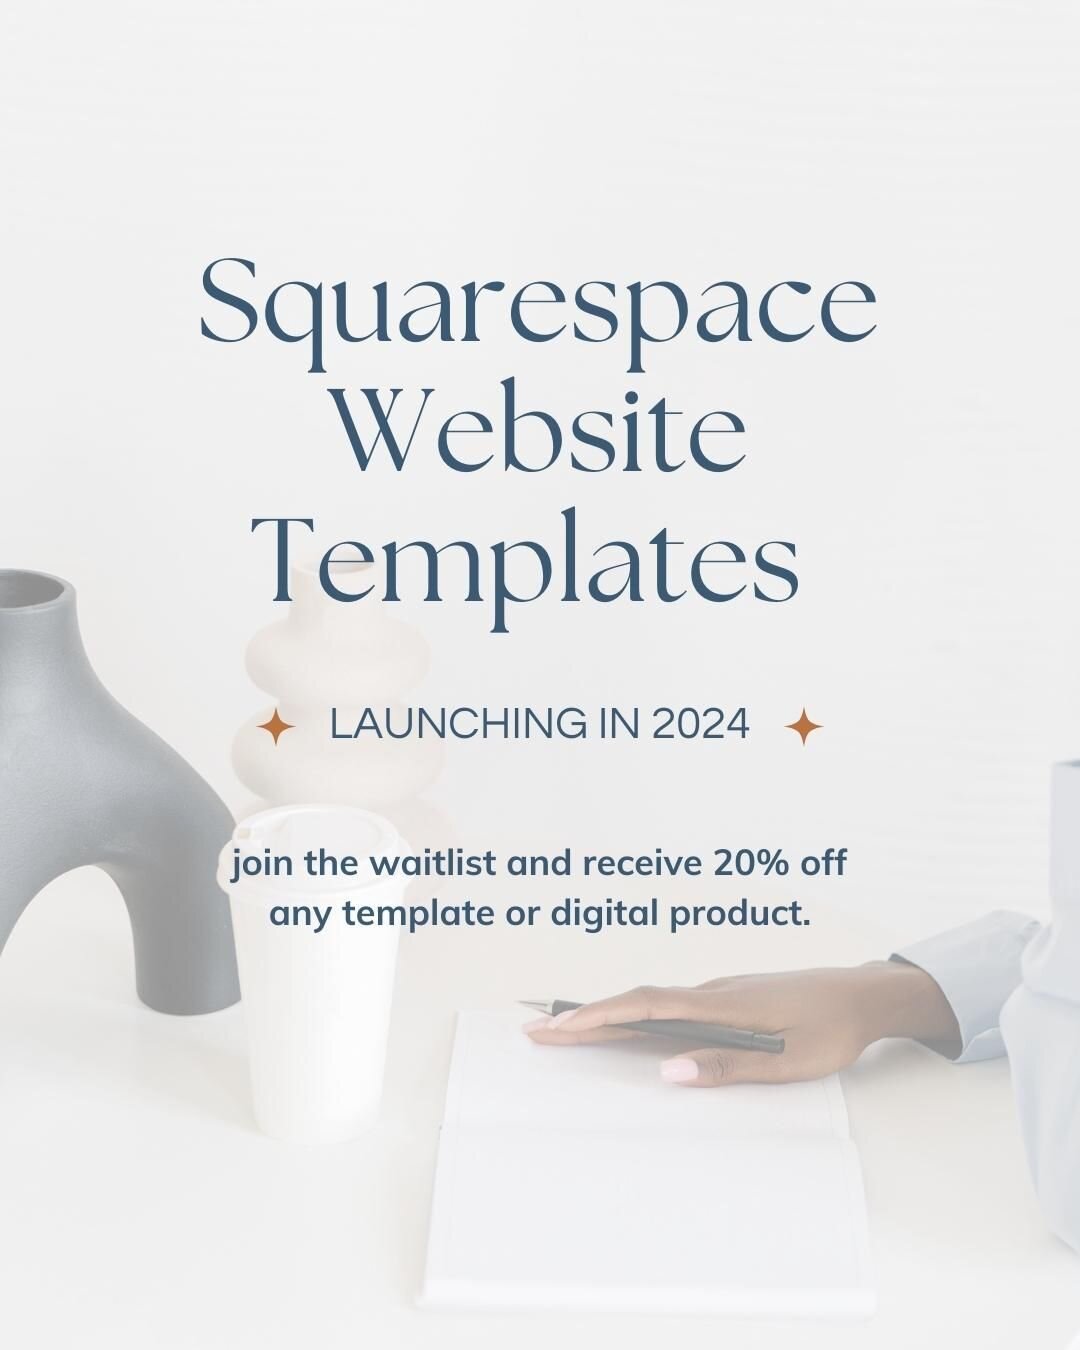 It's true! Templates are coming! Offering Squarespace templates designed specifically for therapists, helpers, and healers have been on my business goals list for some time. 

These templates are designed with the same strategy used in my 1:1 custom 